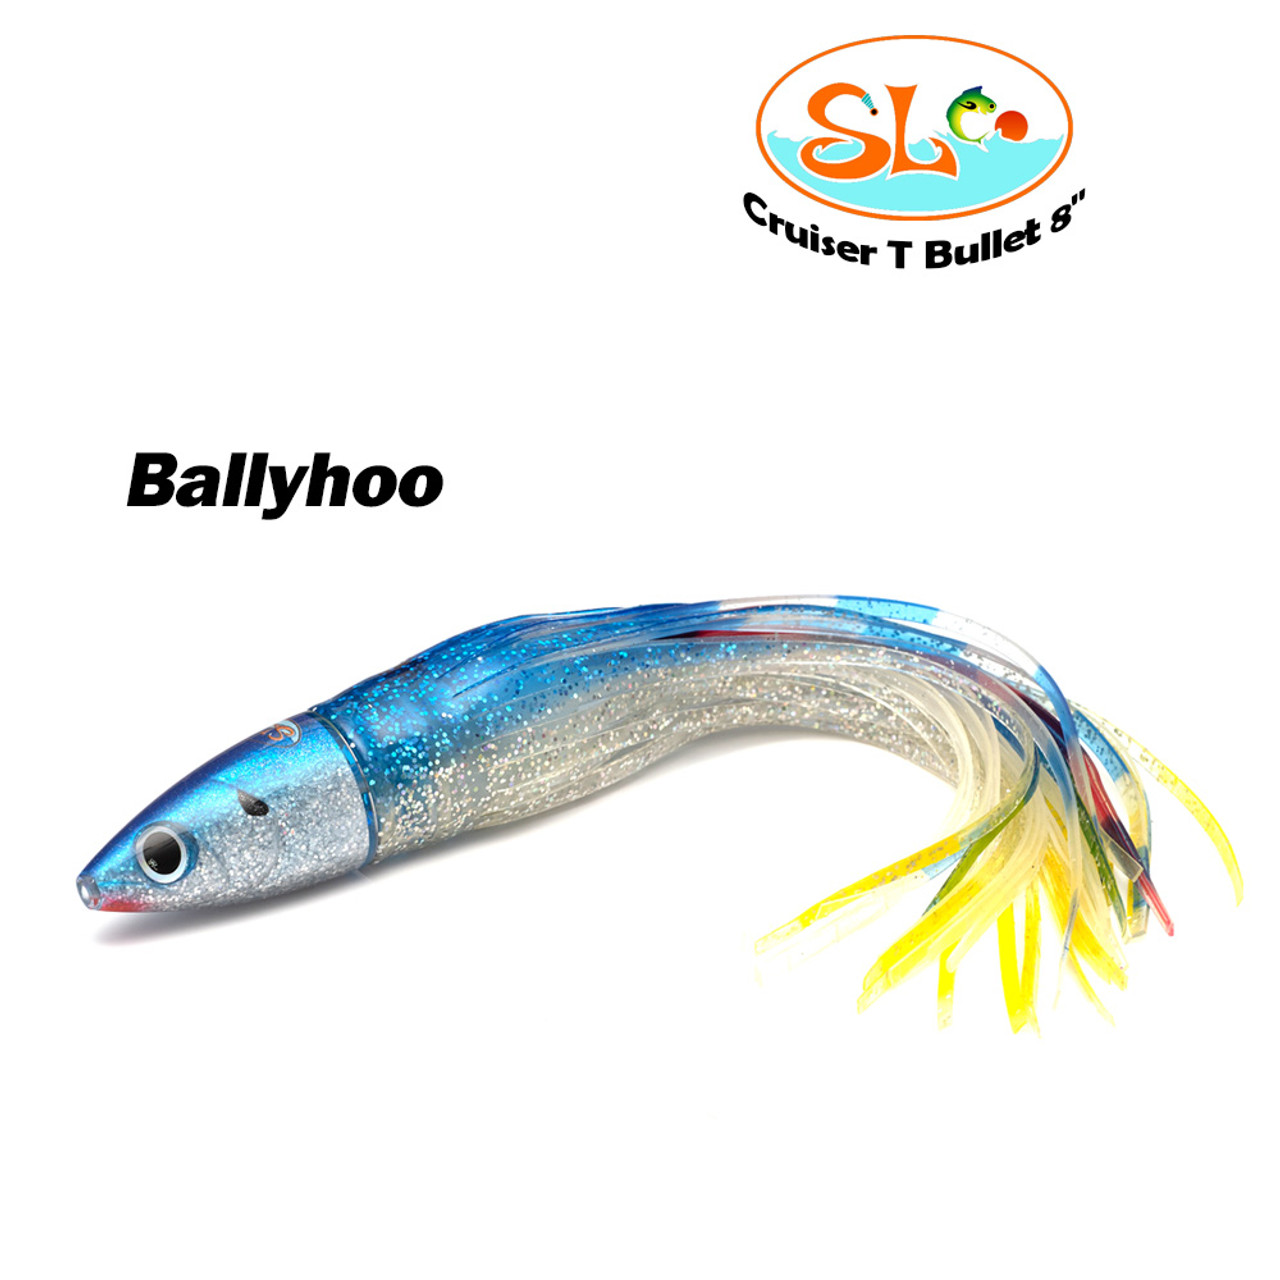 Small Lure Company Cruiser T Bullet 8